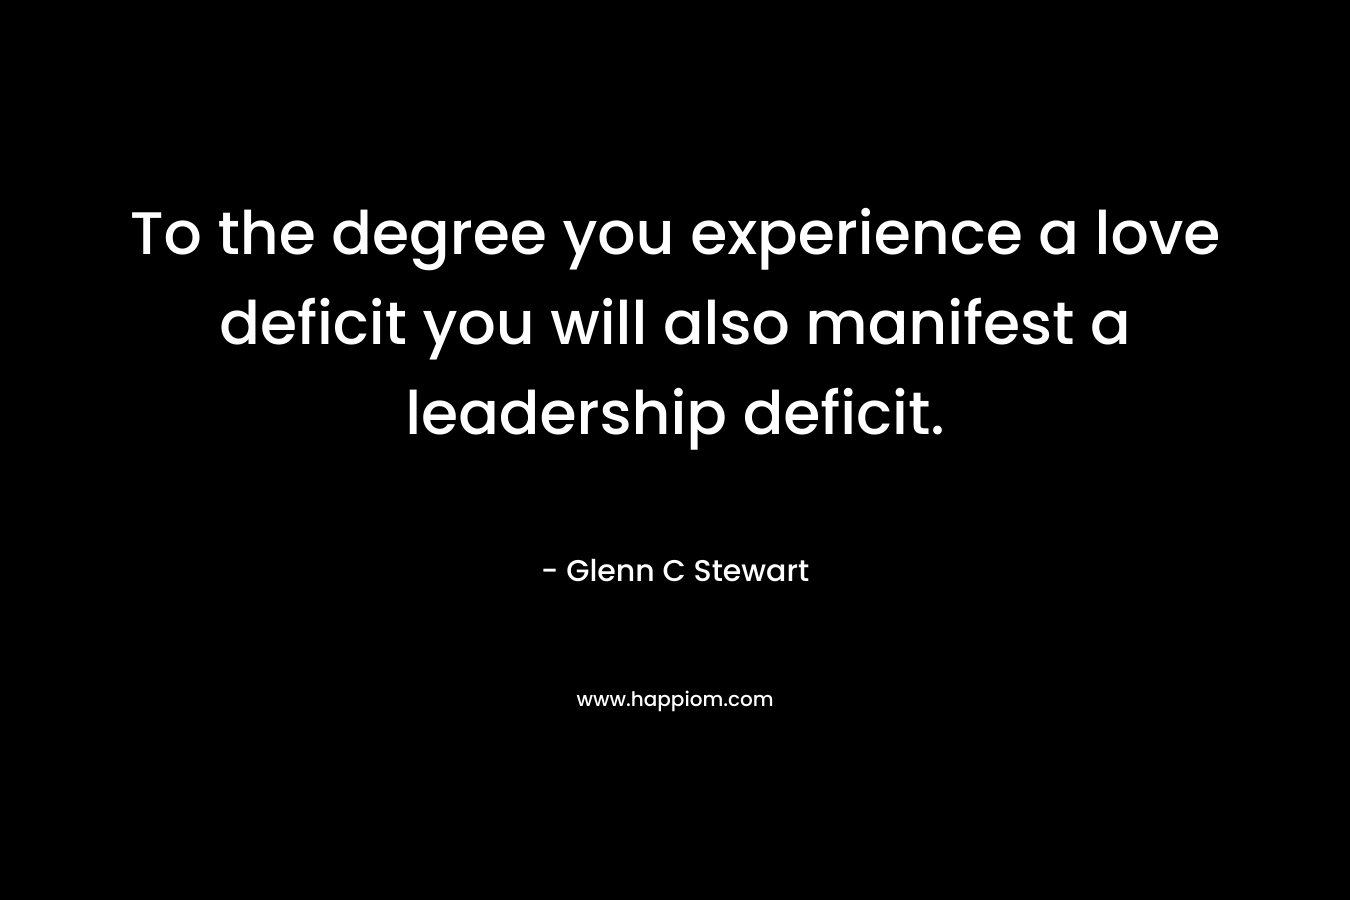 To the degree you experience a love deficit you will also manifest a leadership deficit. – Glenn C Stewart